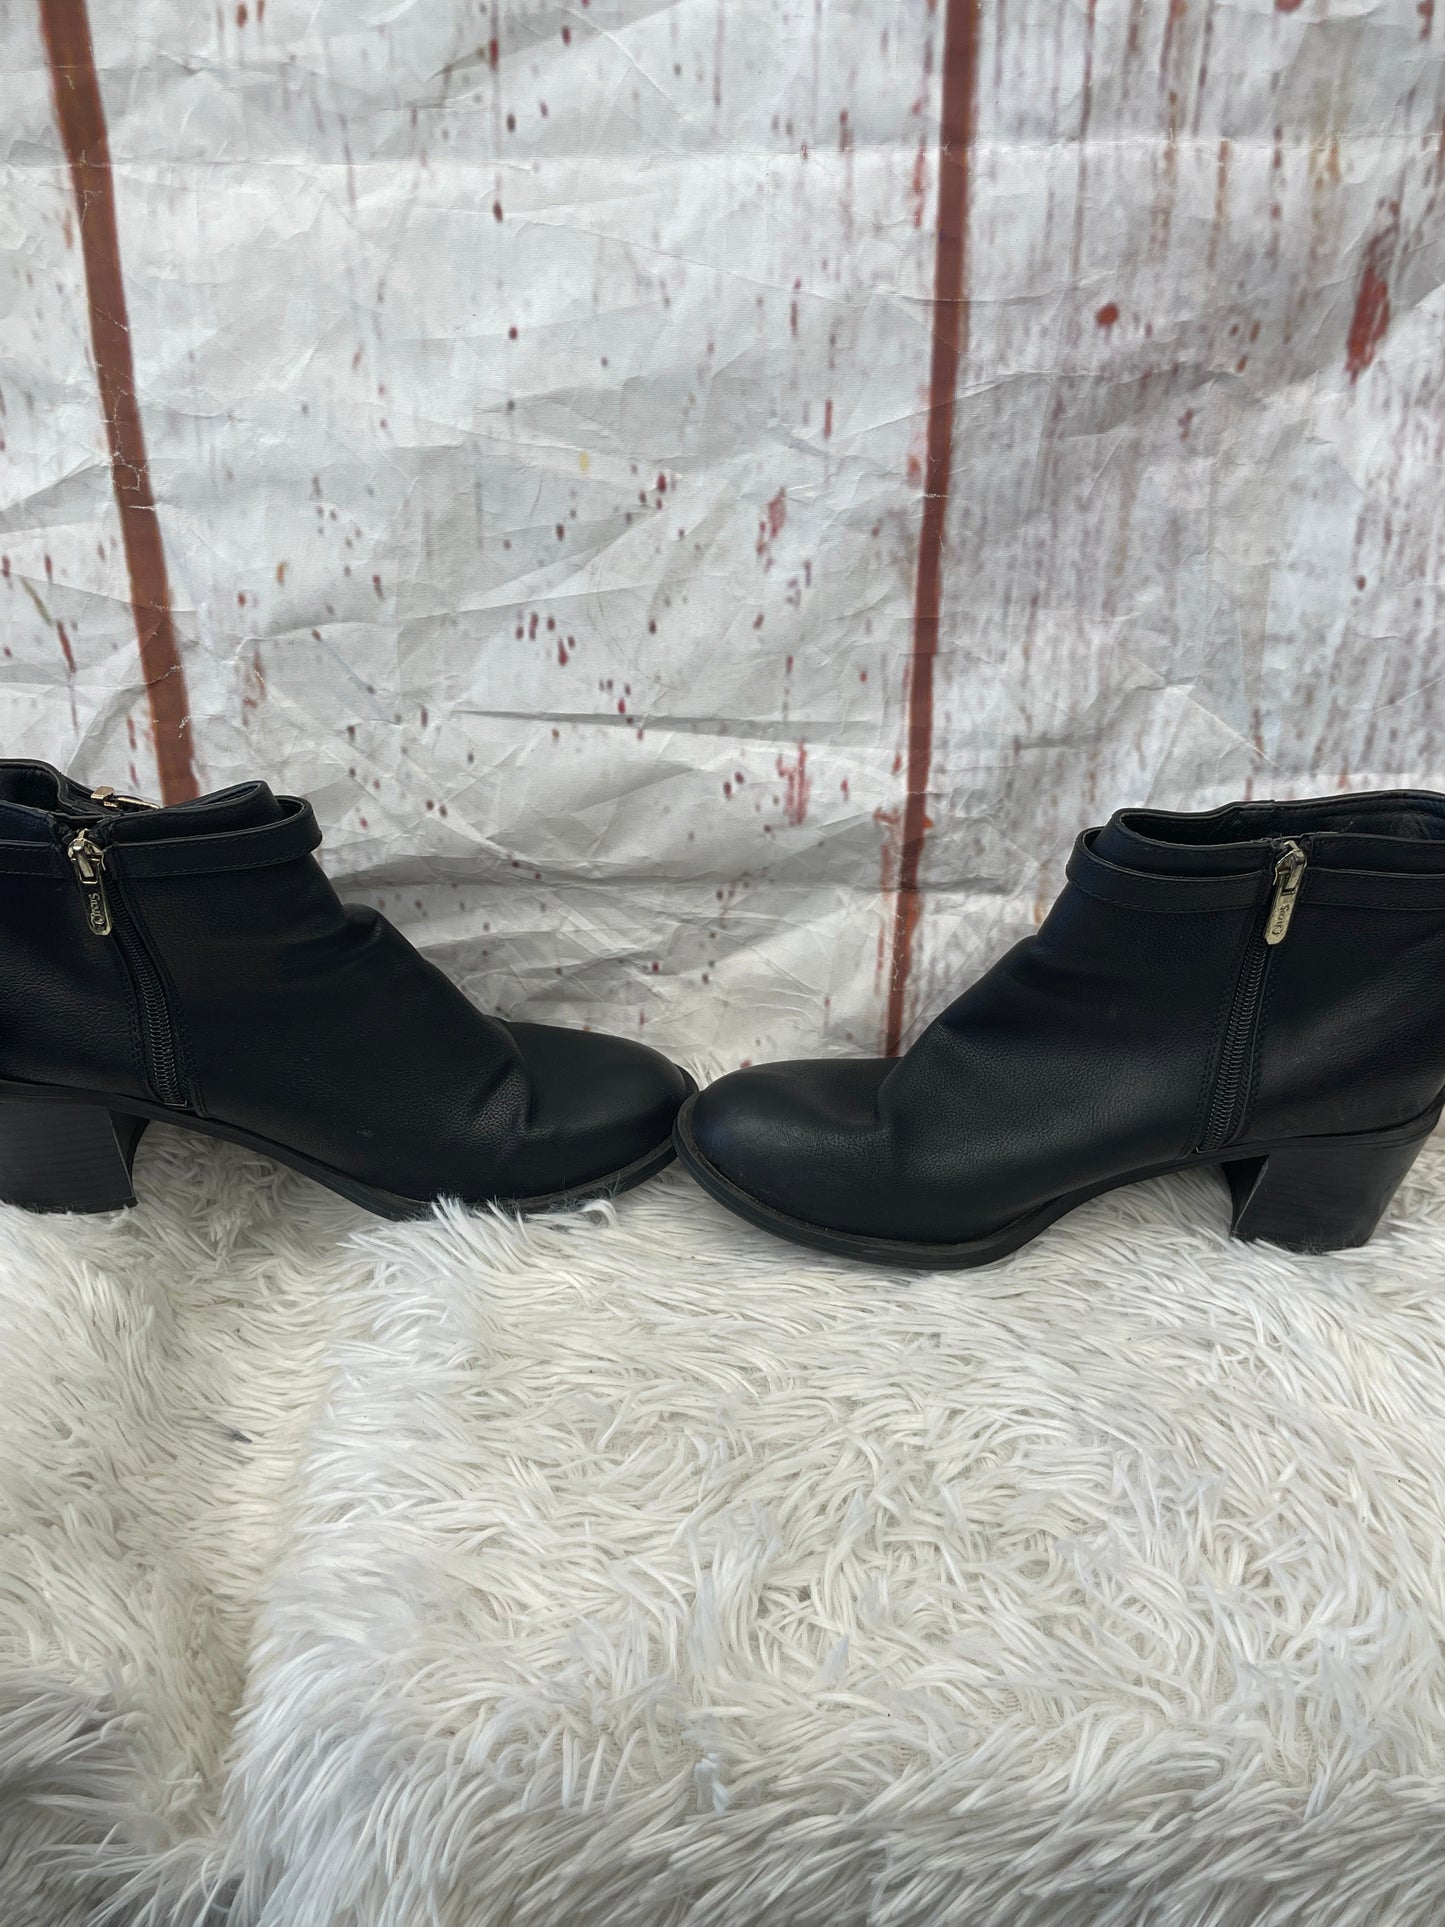 Boots Ankle Heels By Circus By Sam Edelman  Size: 9.5